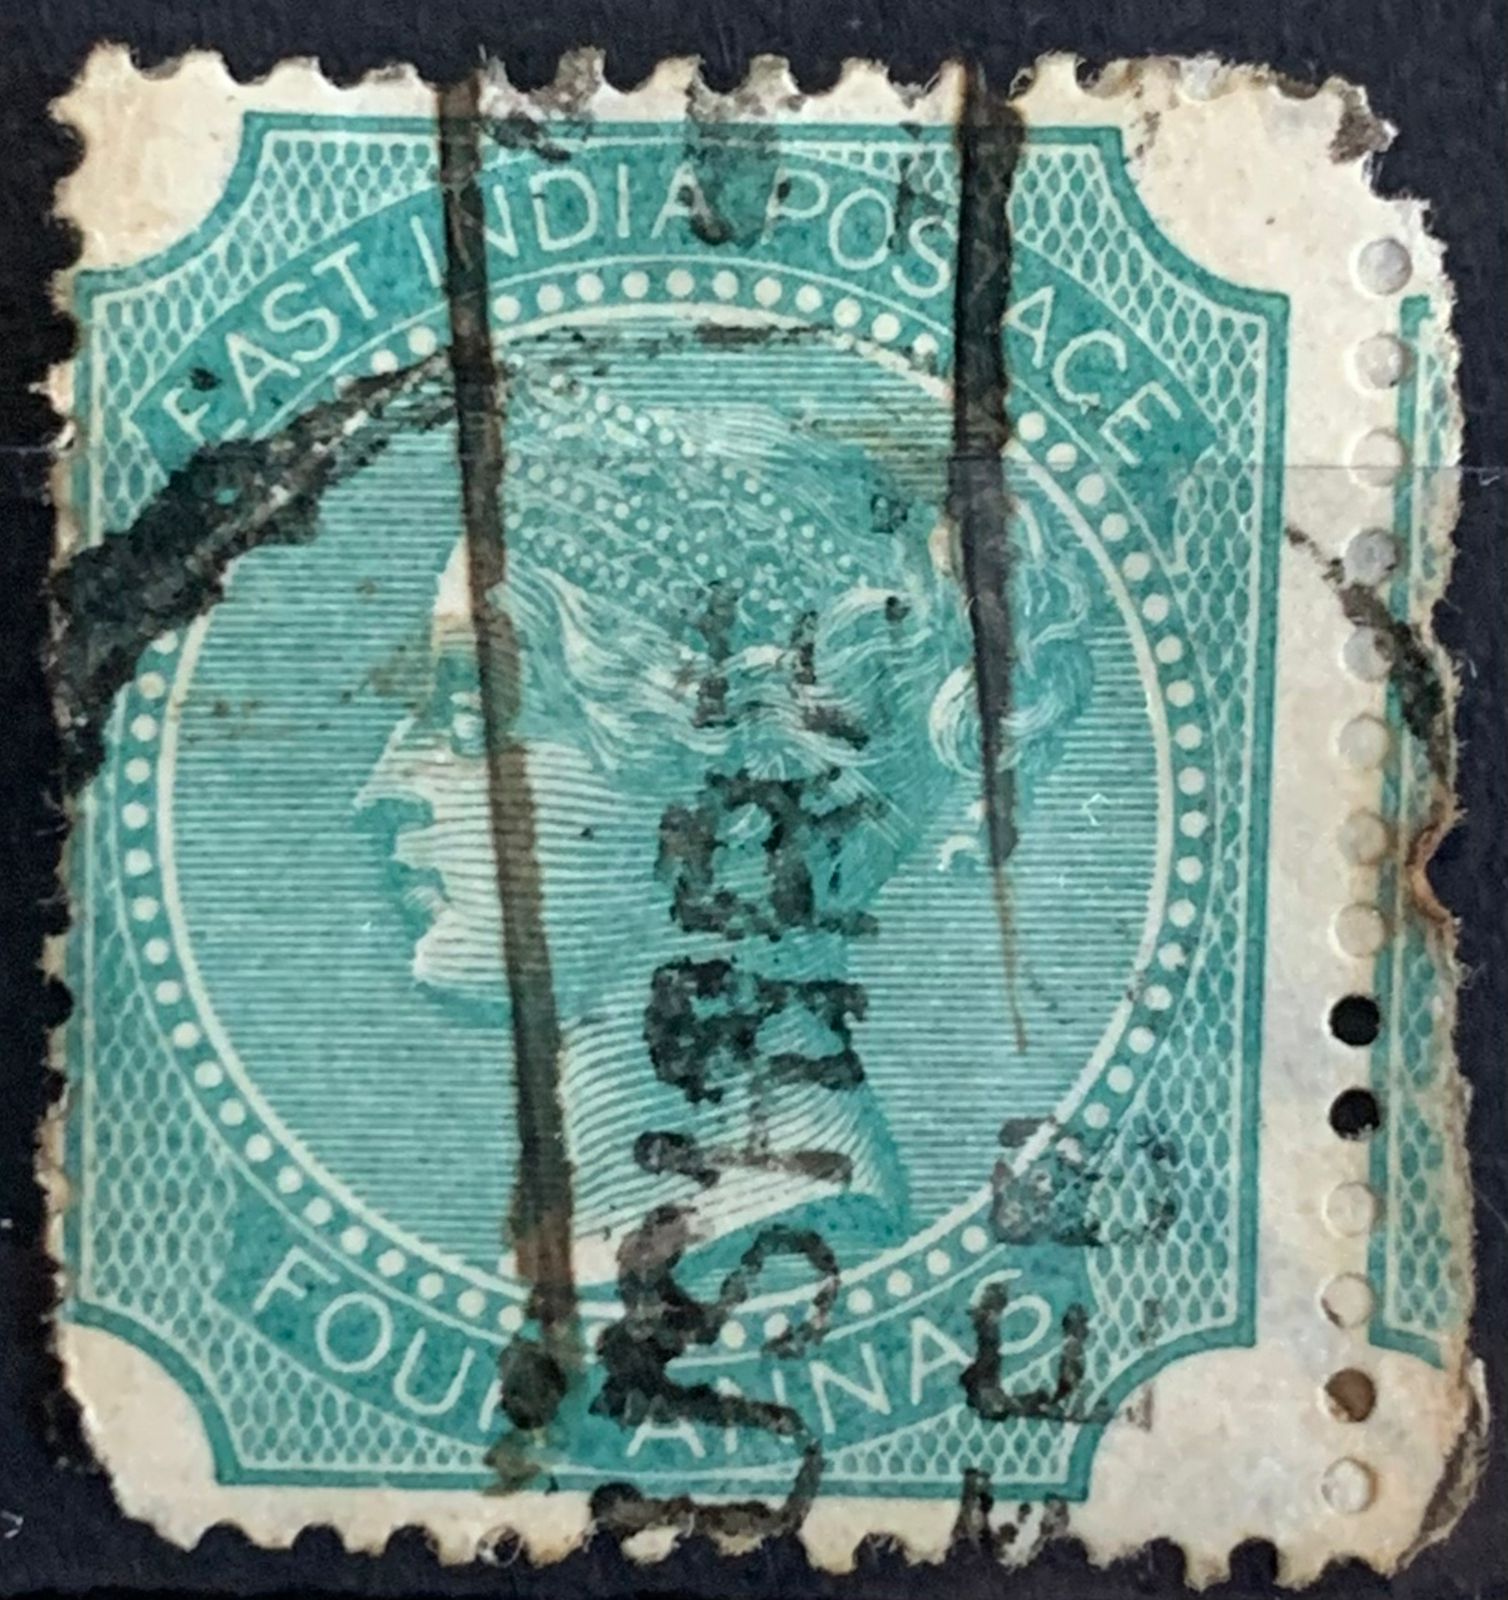 India 1866 QV 4a Used Abroad in BUSHIRE